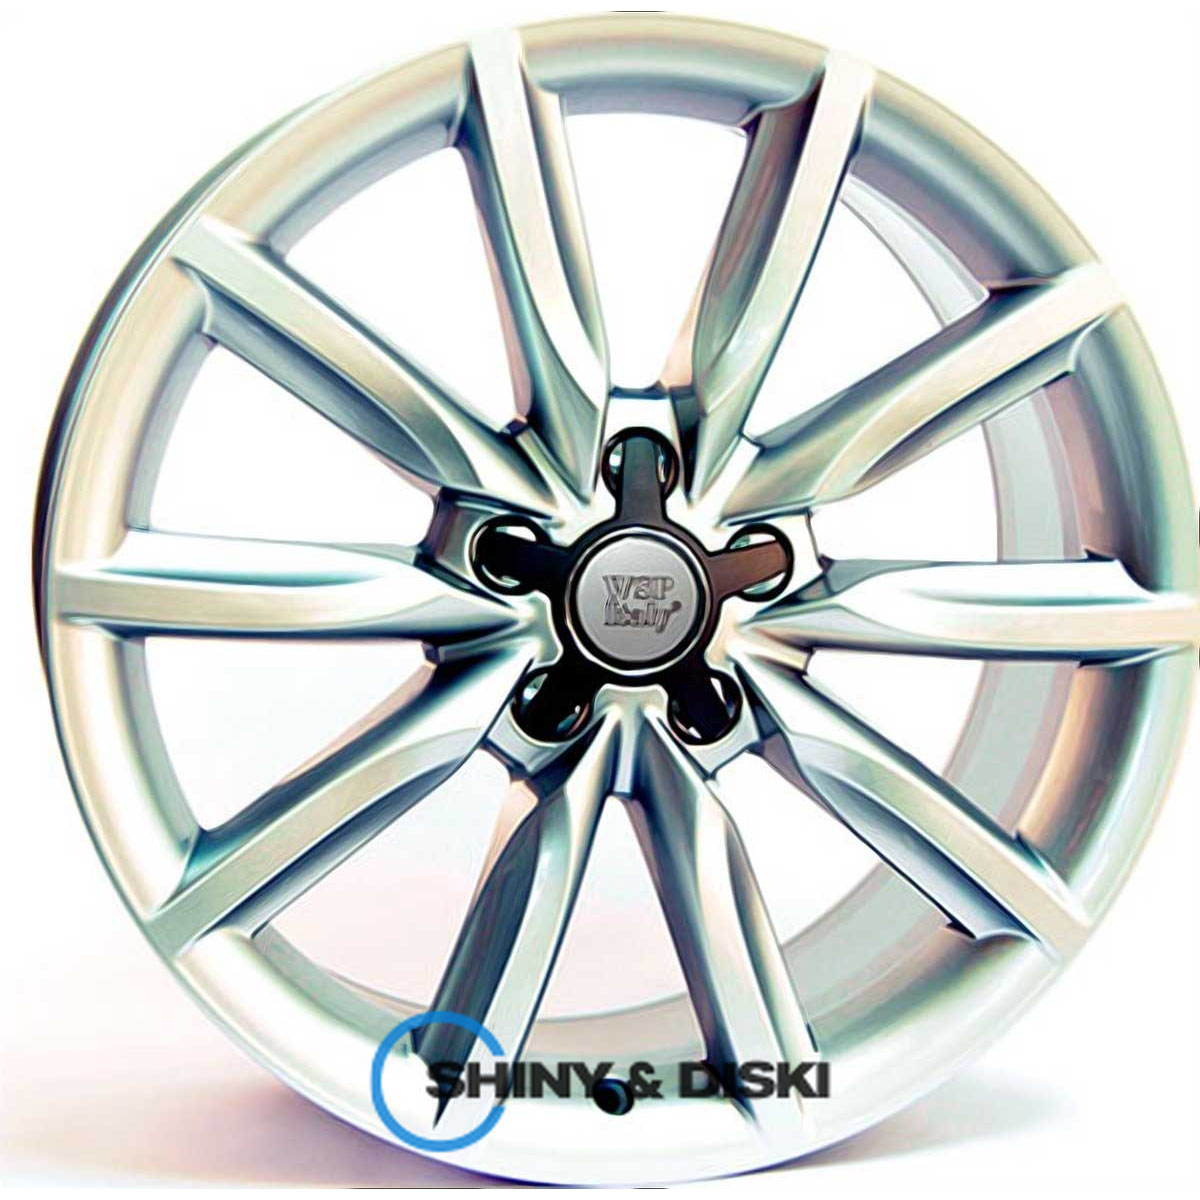 wsp italy audi w550 allroad canyon s r18 w8 pcd5x112 et45 dia57.1